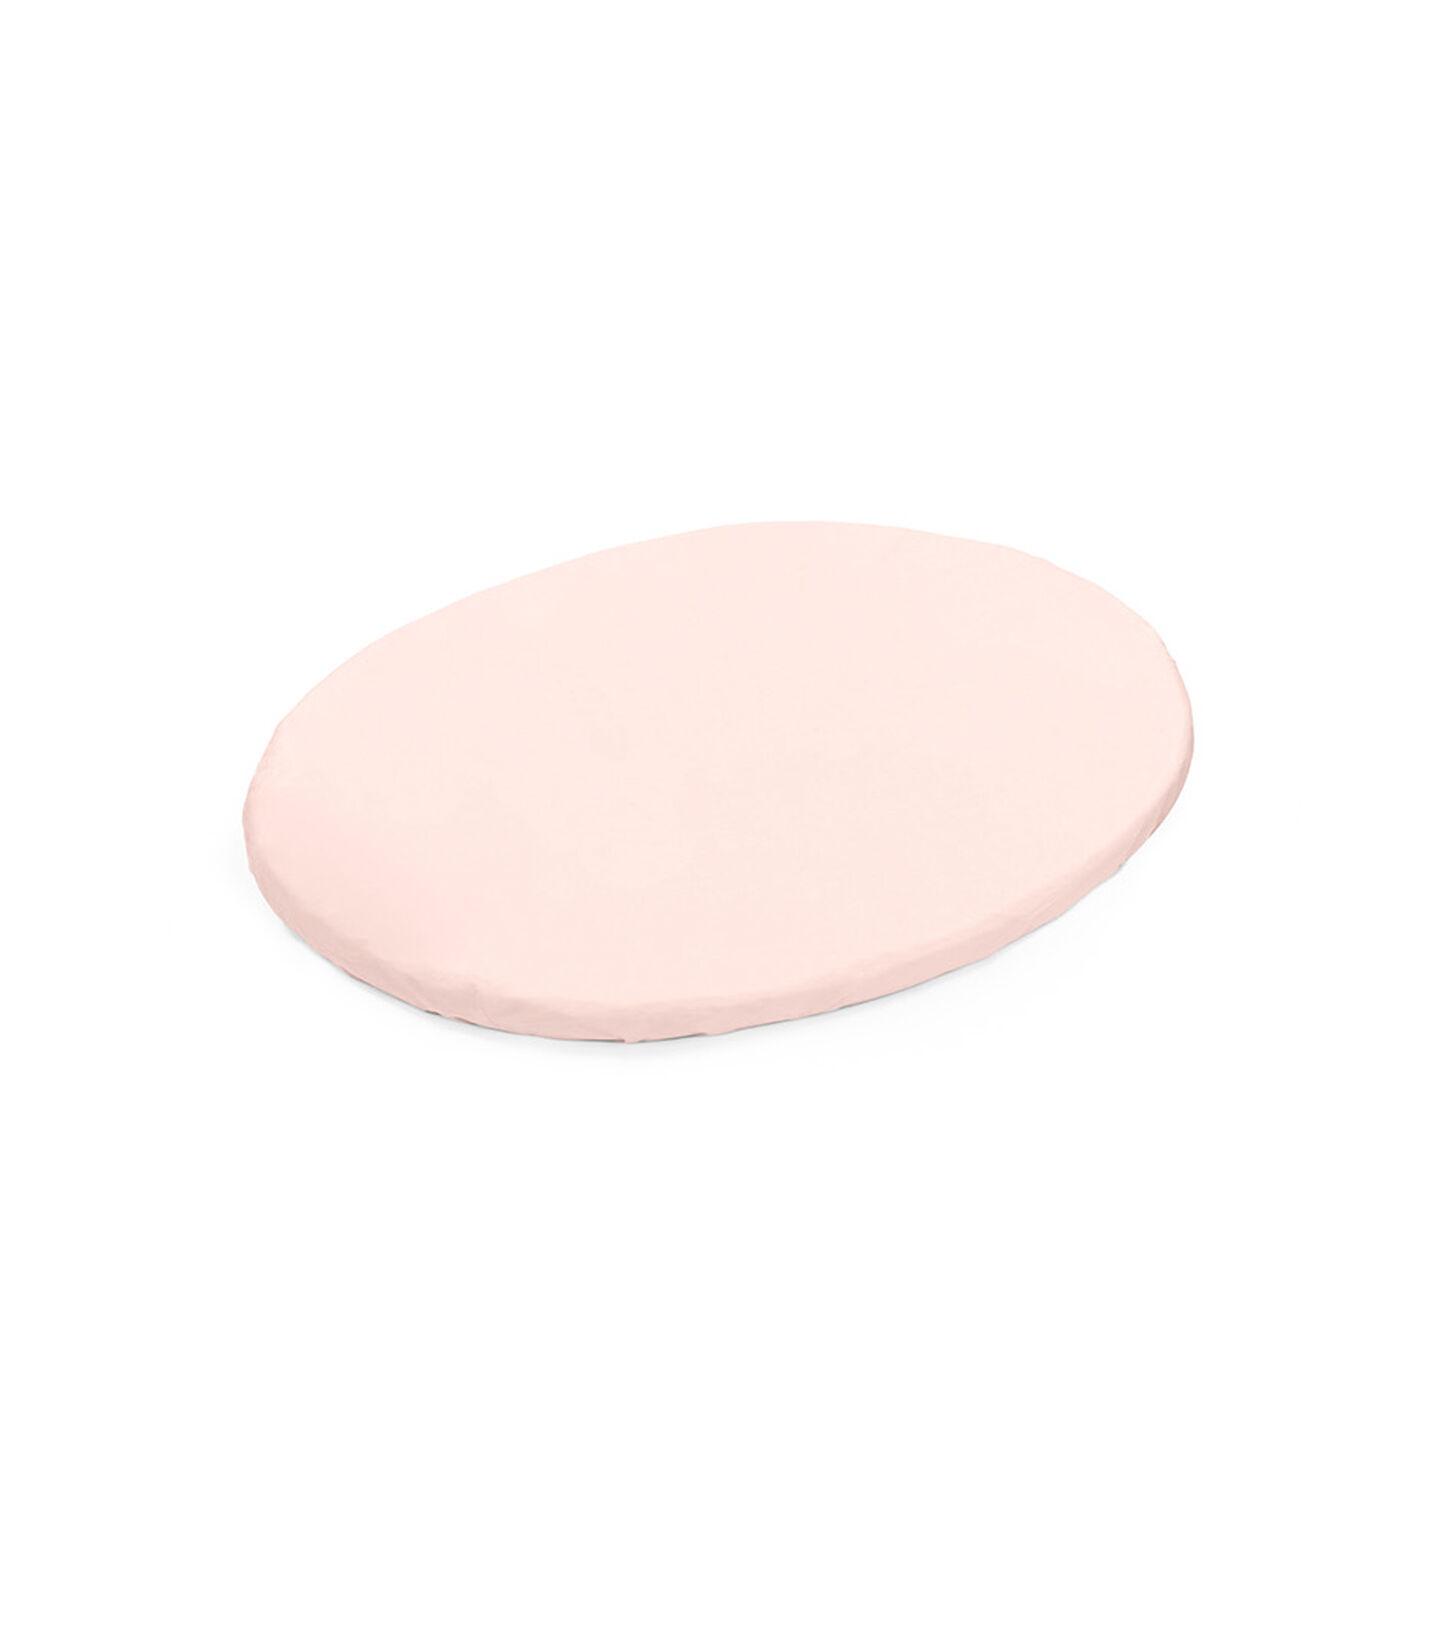 Stokke® Sleepi™ Mini Fitted Sheet Peachy Pink, Peachy Pink, mainview view 1